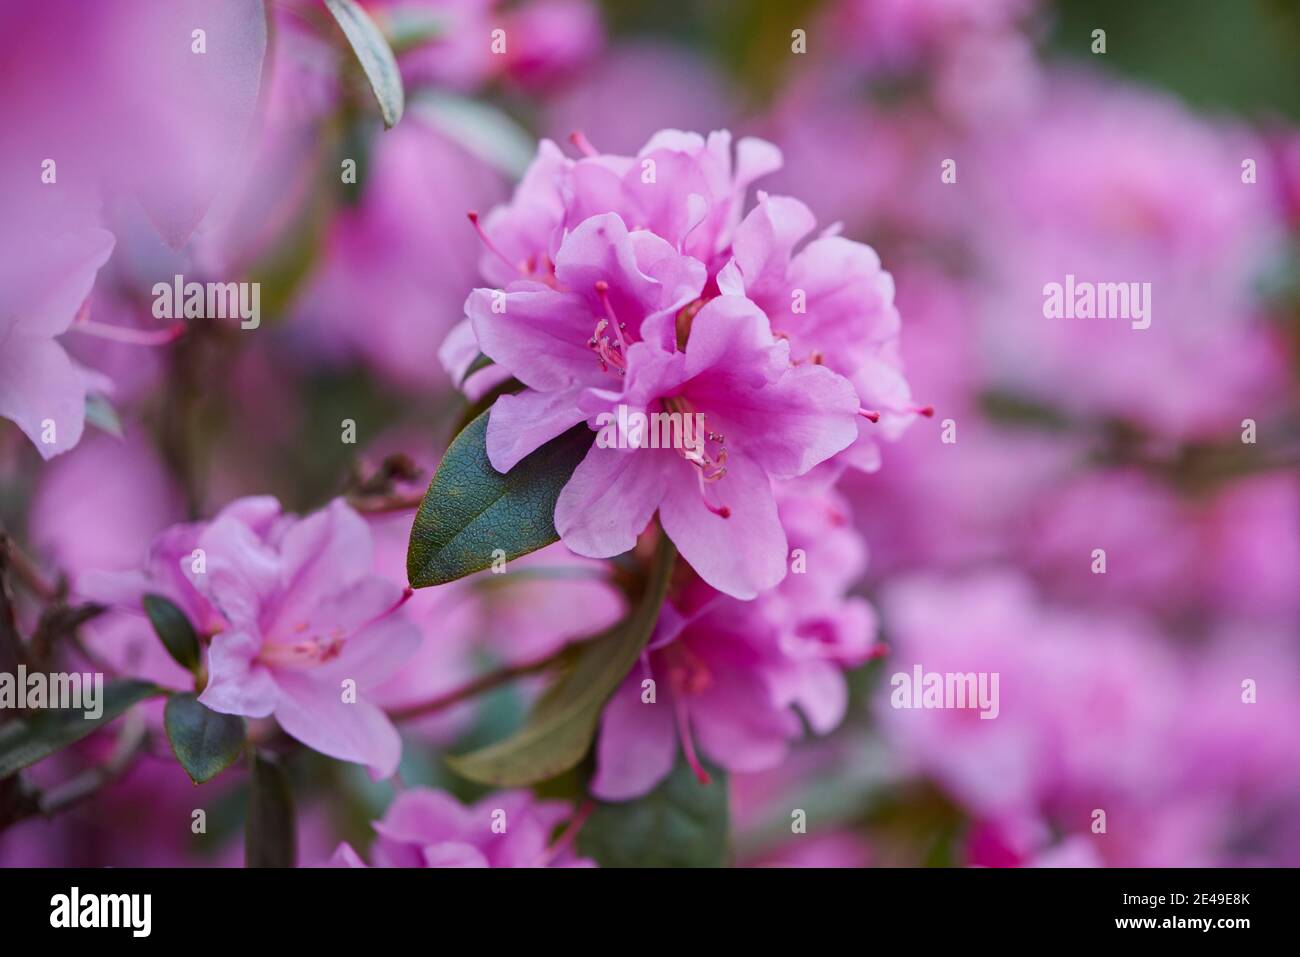 Pink-colored rhododendron flowers (Rhododendro), Bavaria, Germany Stock Photo